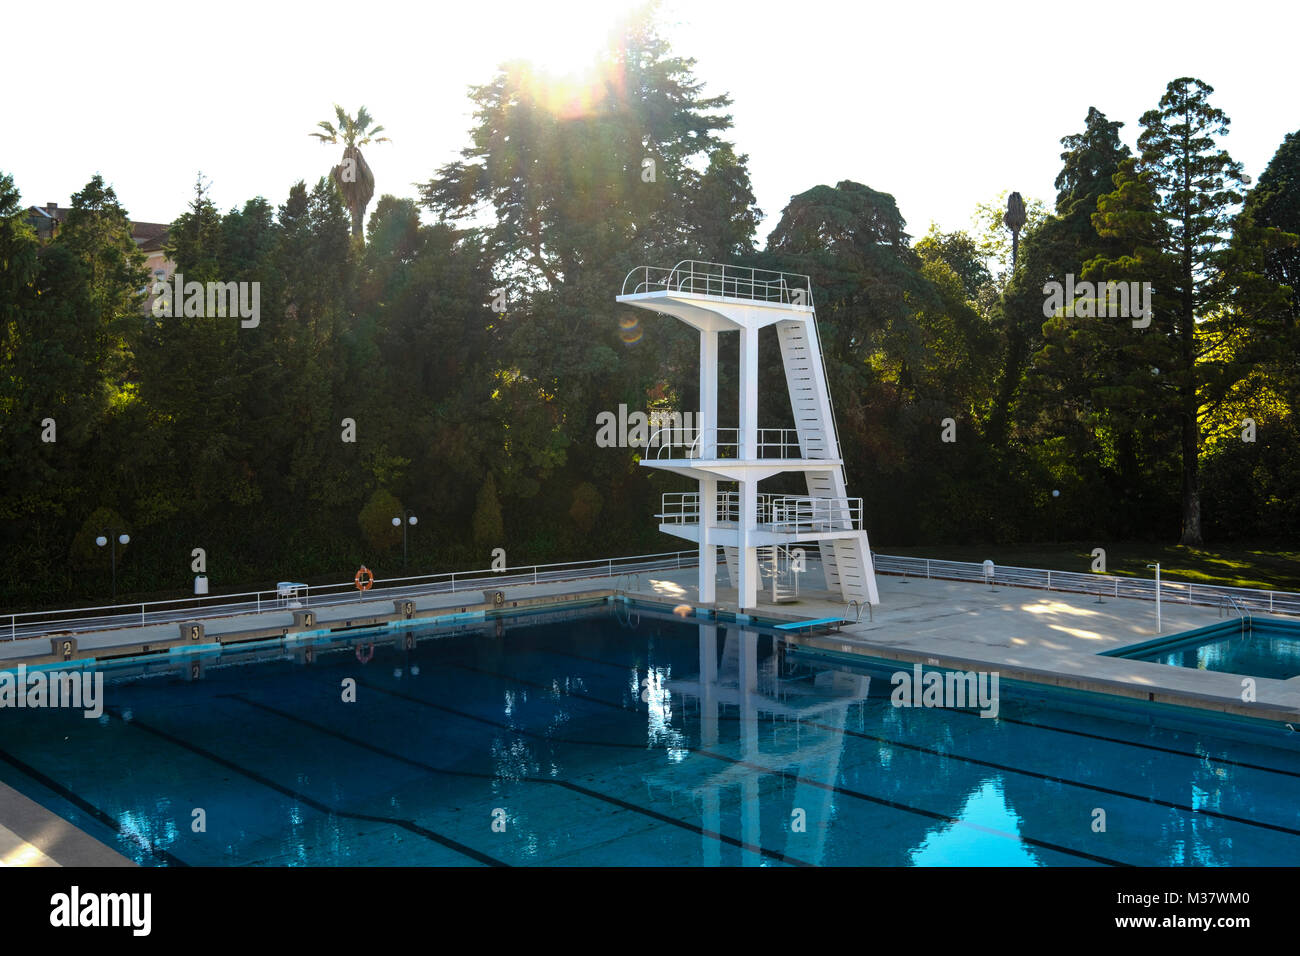 Concrete diving boards at a public outdoor swimming pool Stock Photo